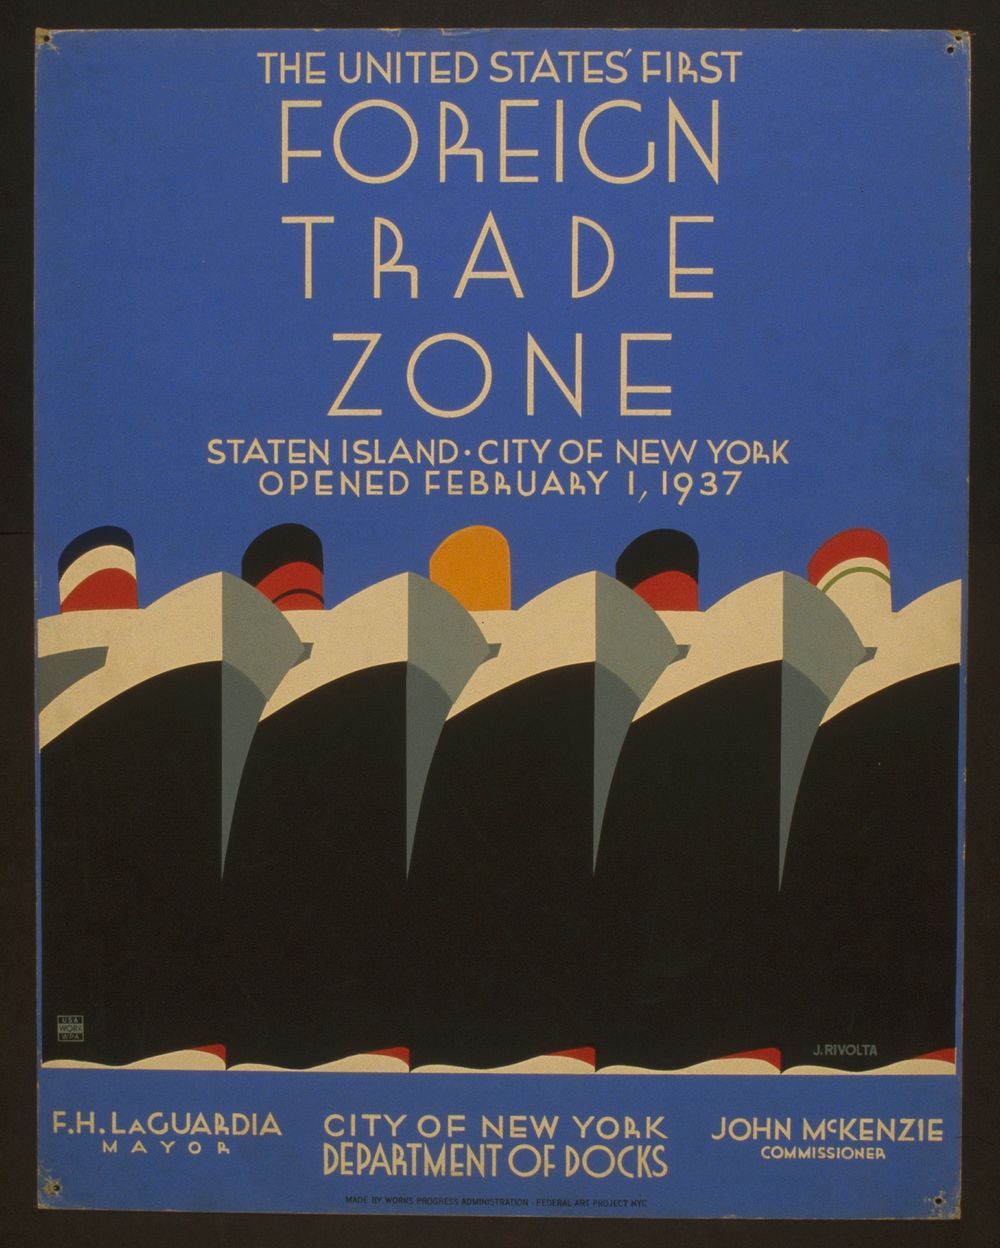 The United States' first foreign trade zone Staten Island, City of New York, opened February 1, 1937 / / J. Rivolta.